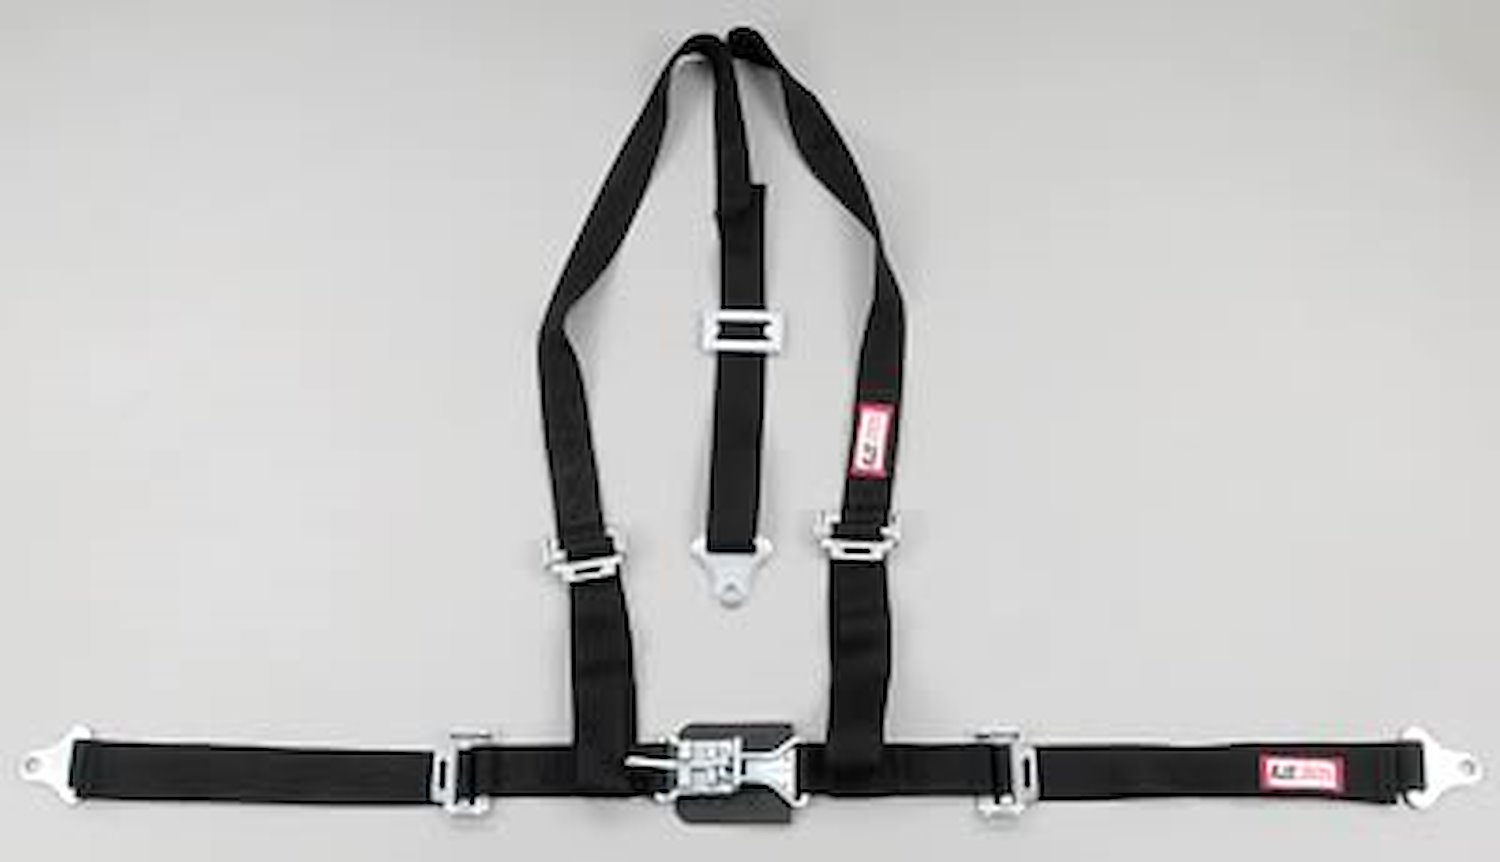 NON-SFI L&L HARNESS 2 PULL UP Lap Belt w/Adjuster 2 S.H. Individual FLOOR MOUNT w/STERNUM STRAP ALL WRAP ENDS BLUE